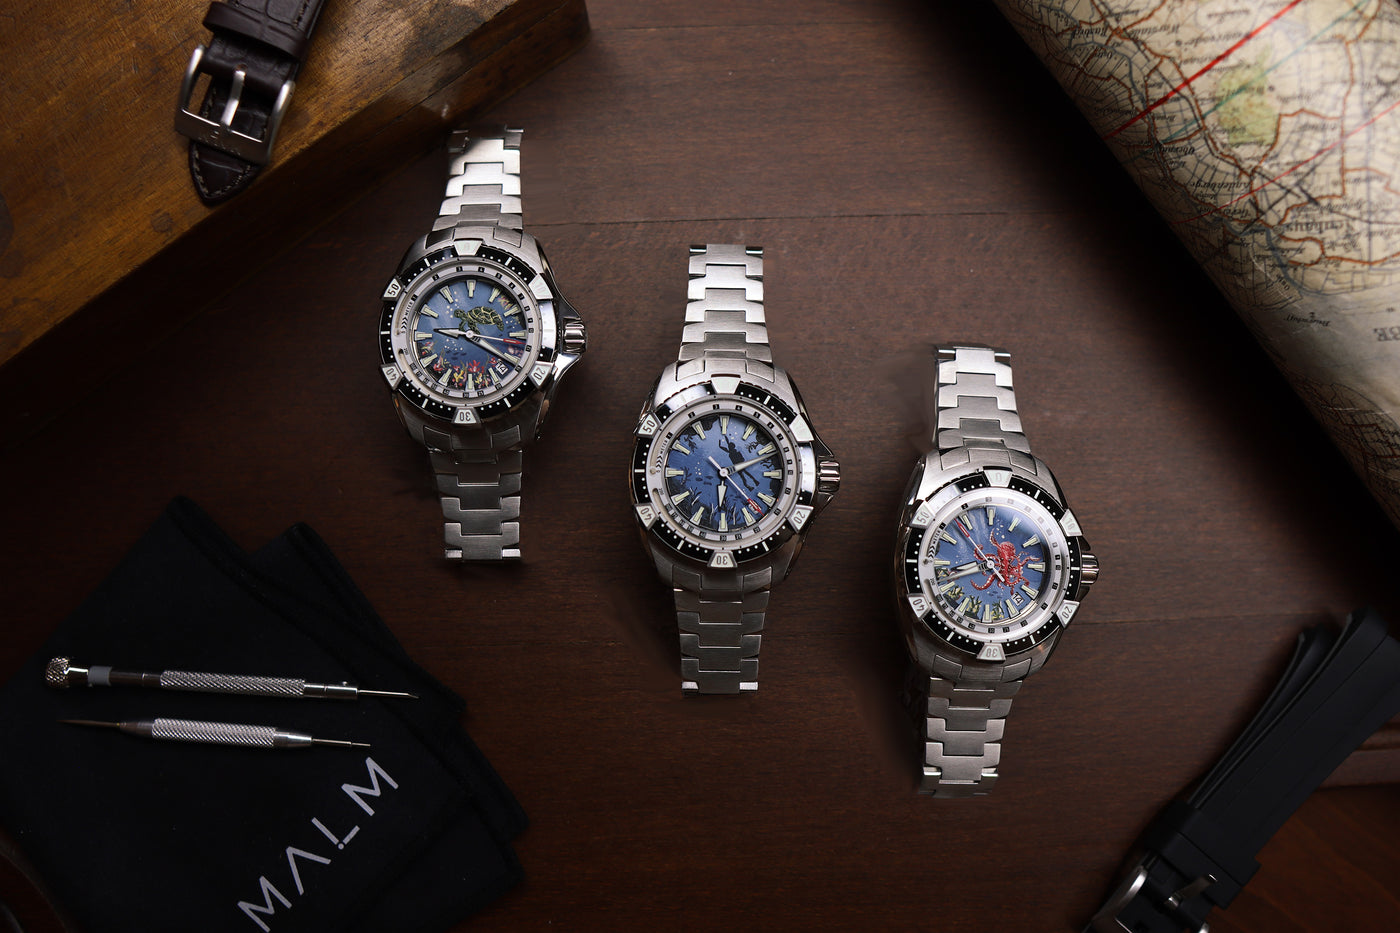 malm watches art collection with hand painted dials